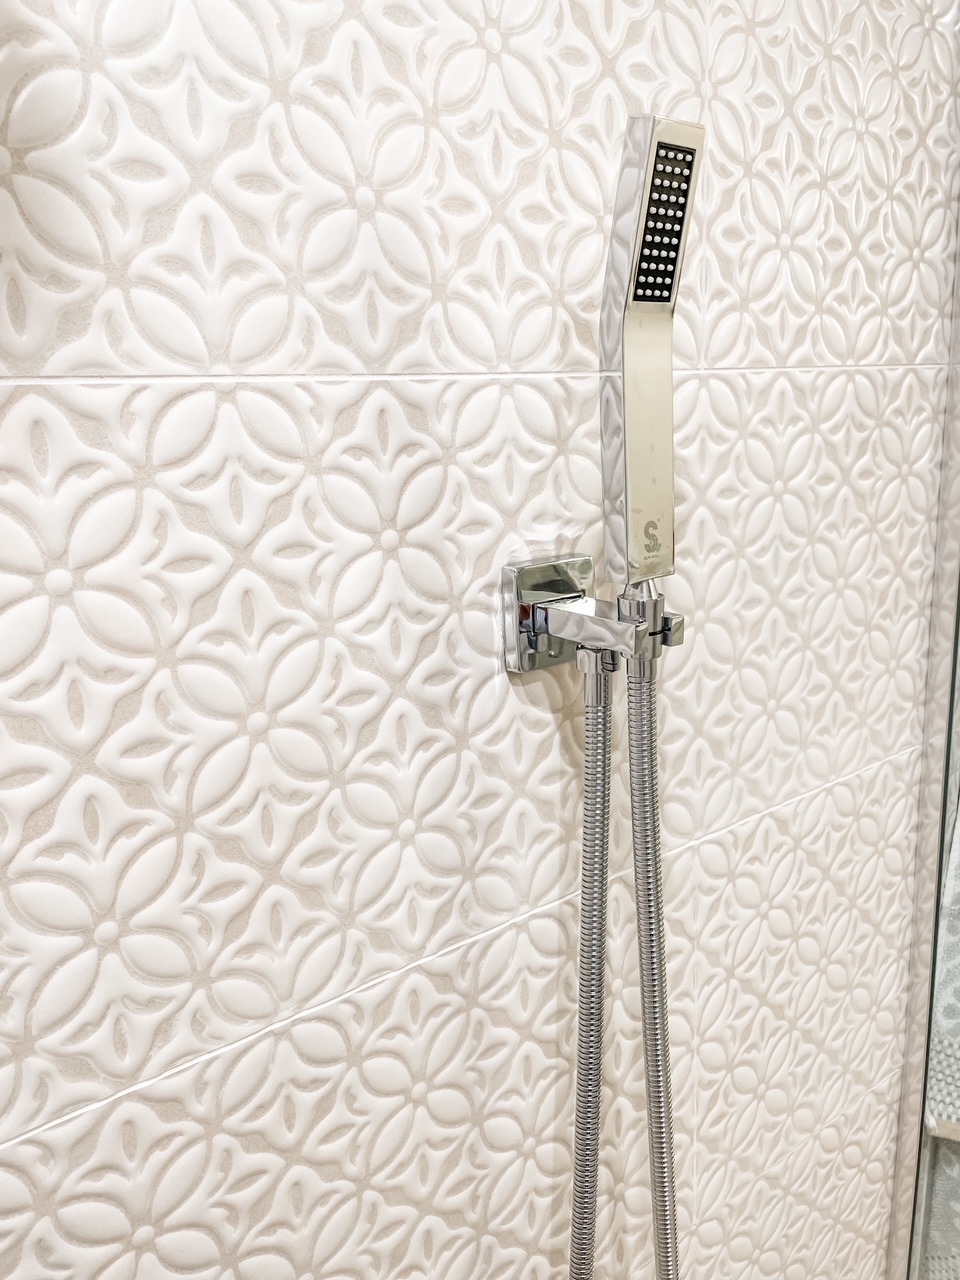 The showerhead and wall tile